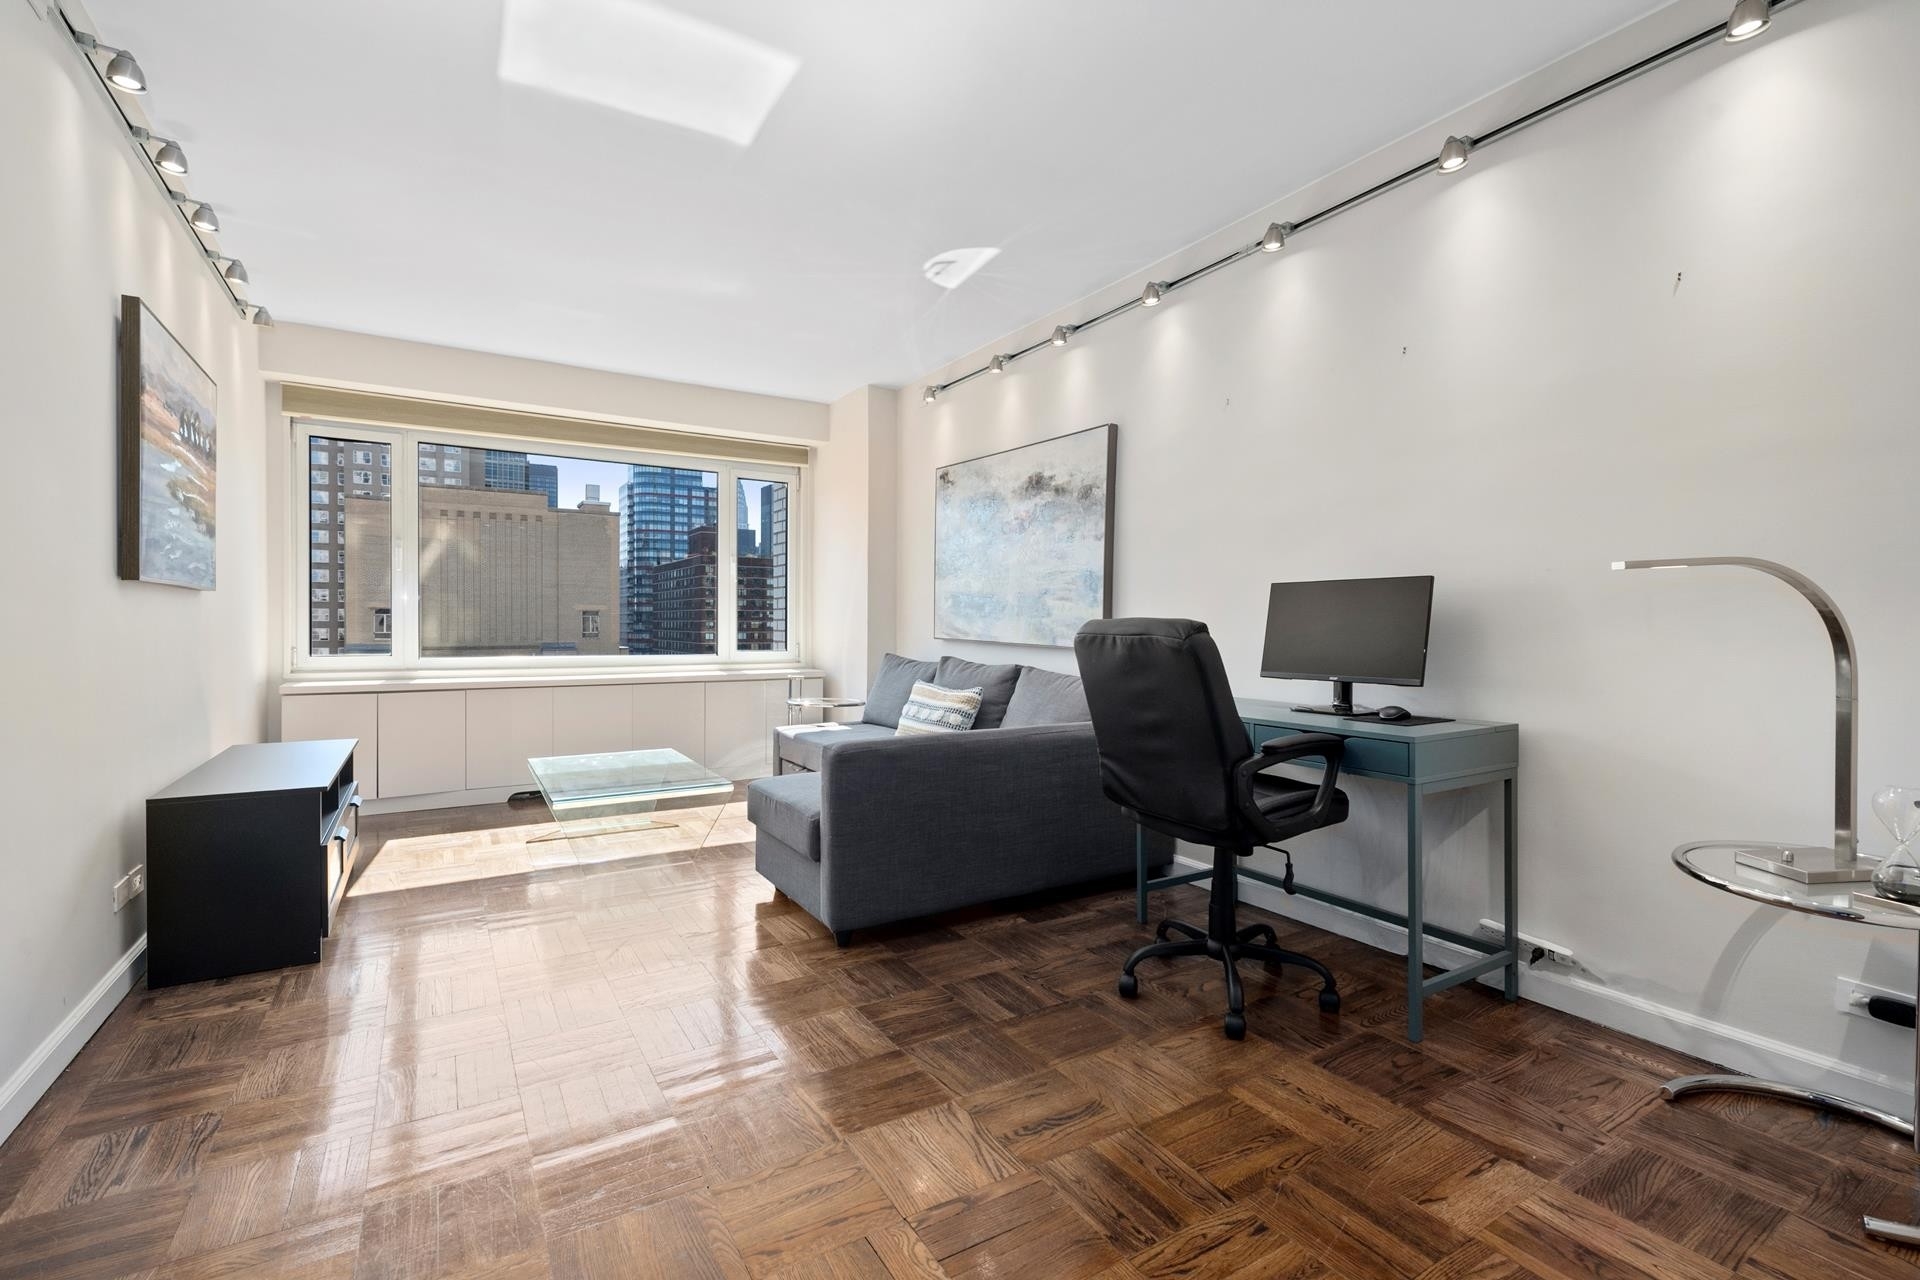 3. Co-op Properties for Sale at The Excelsior, 303 E 57TH ST, 21C Midtown East, New York, NY 10022